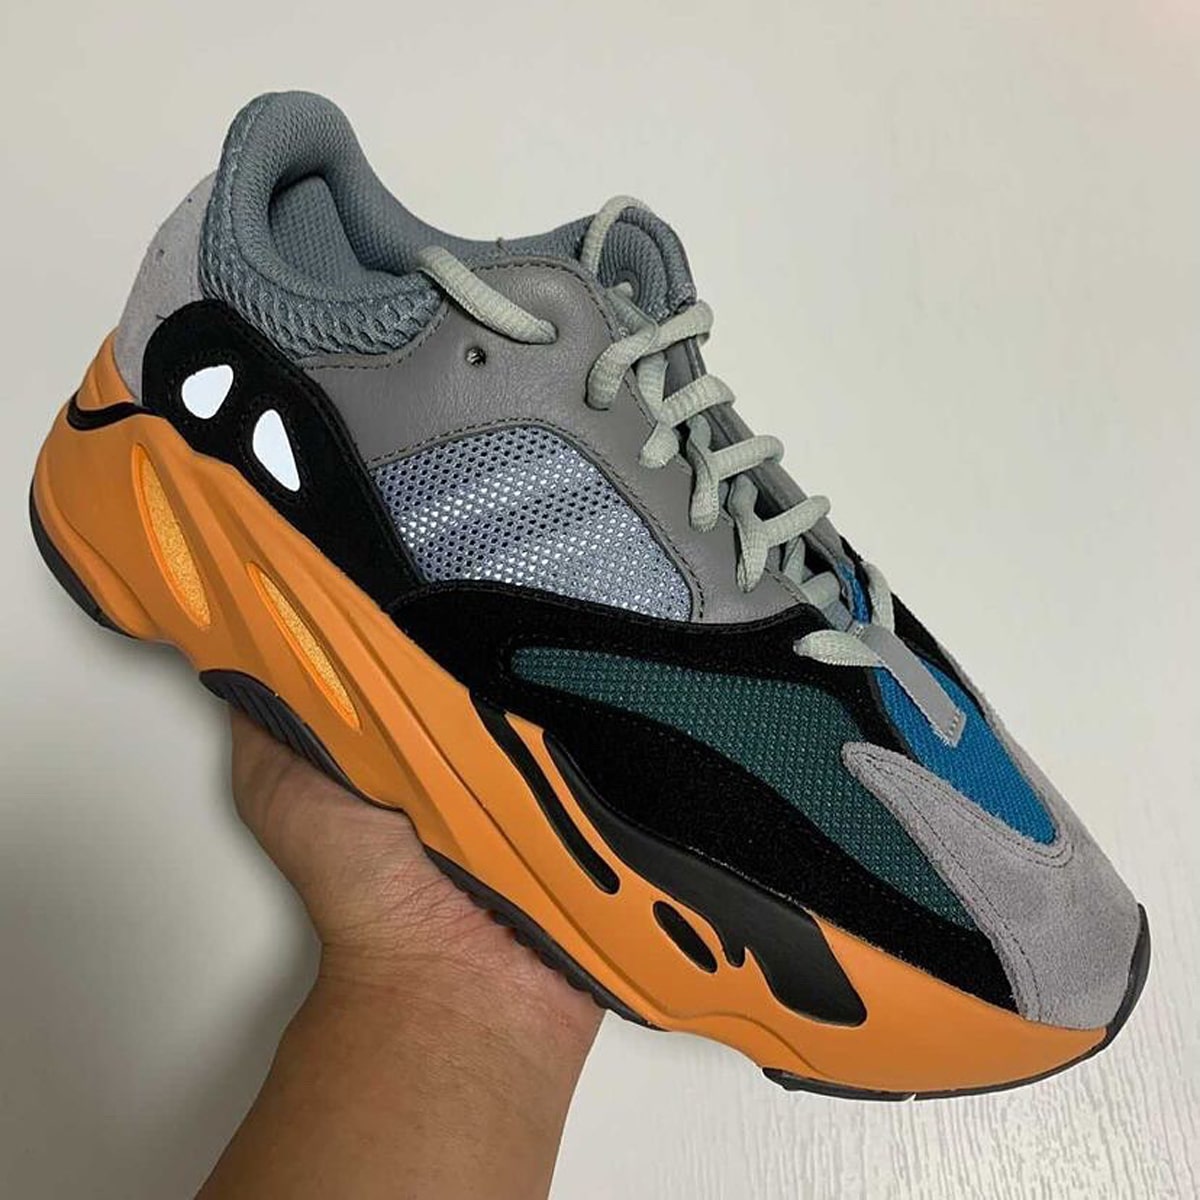 First Look At The Adidas Yeezy Boost 700 “Wash Orange”